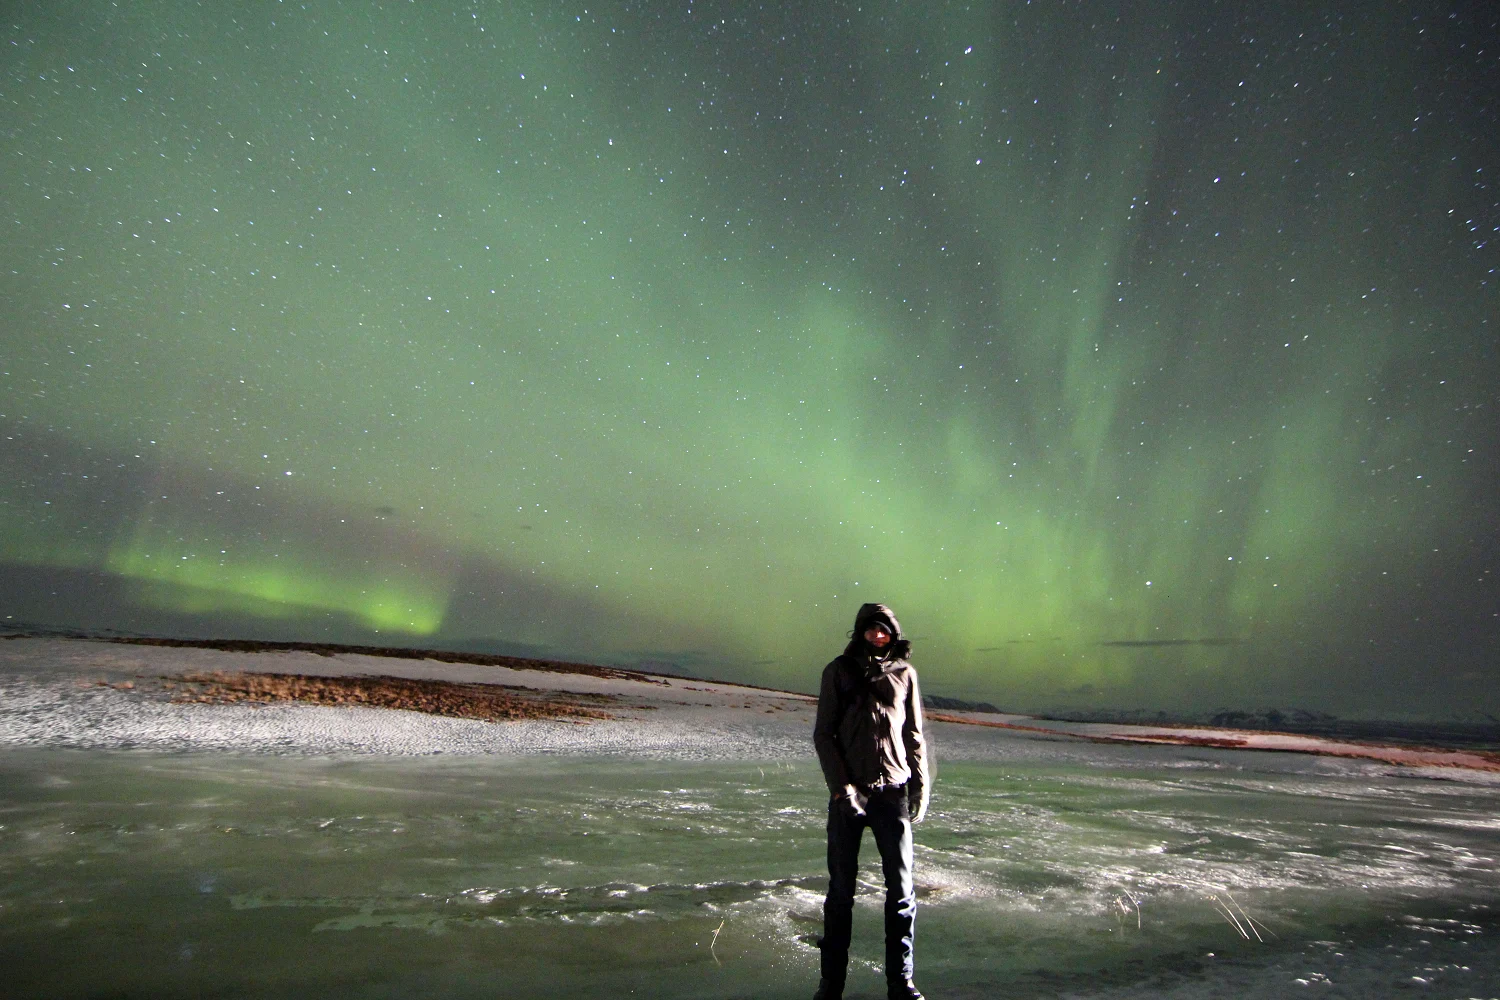 Astronomer Tom Kerss standing underneath the Northern Lights in Norway